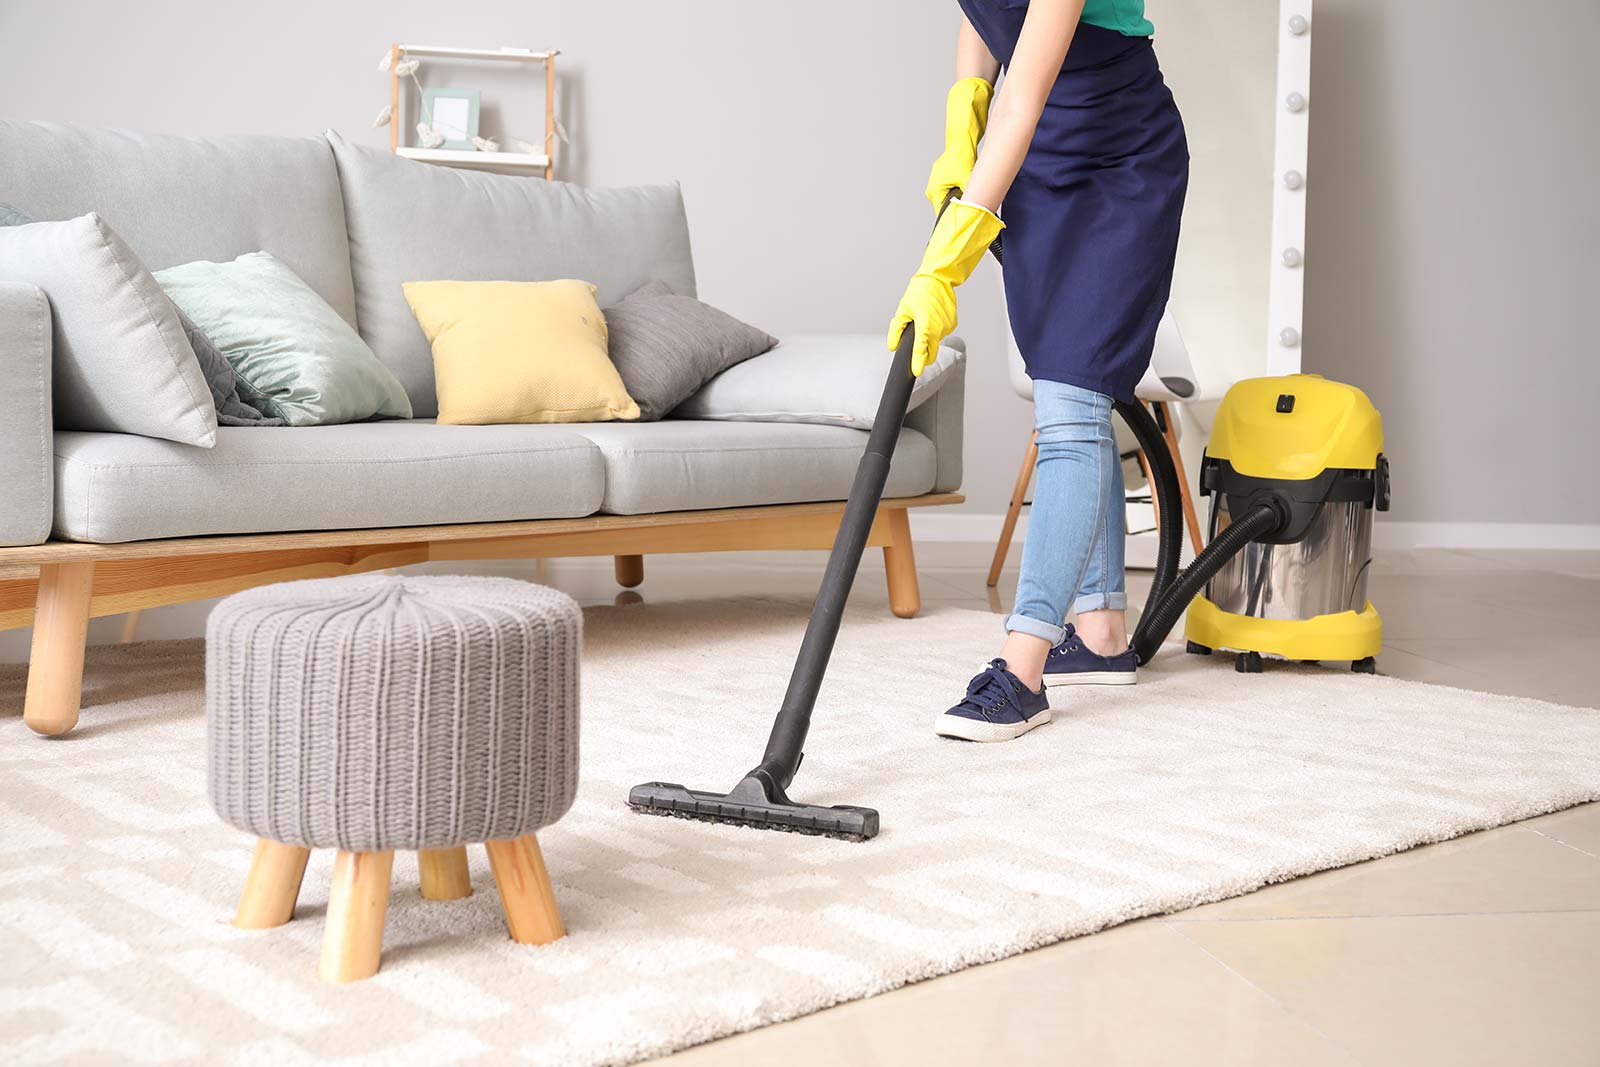 Significance of homegrown cleaning